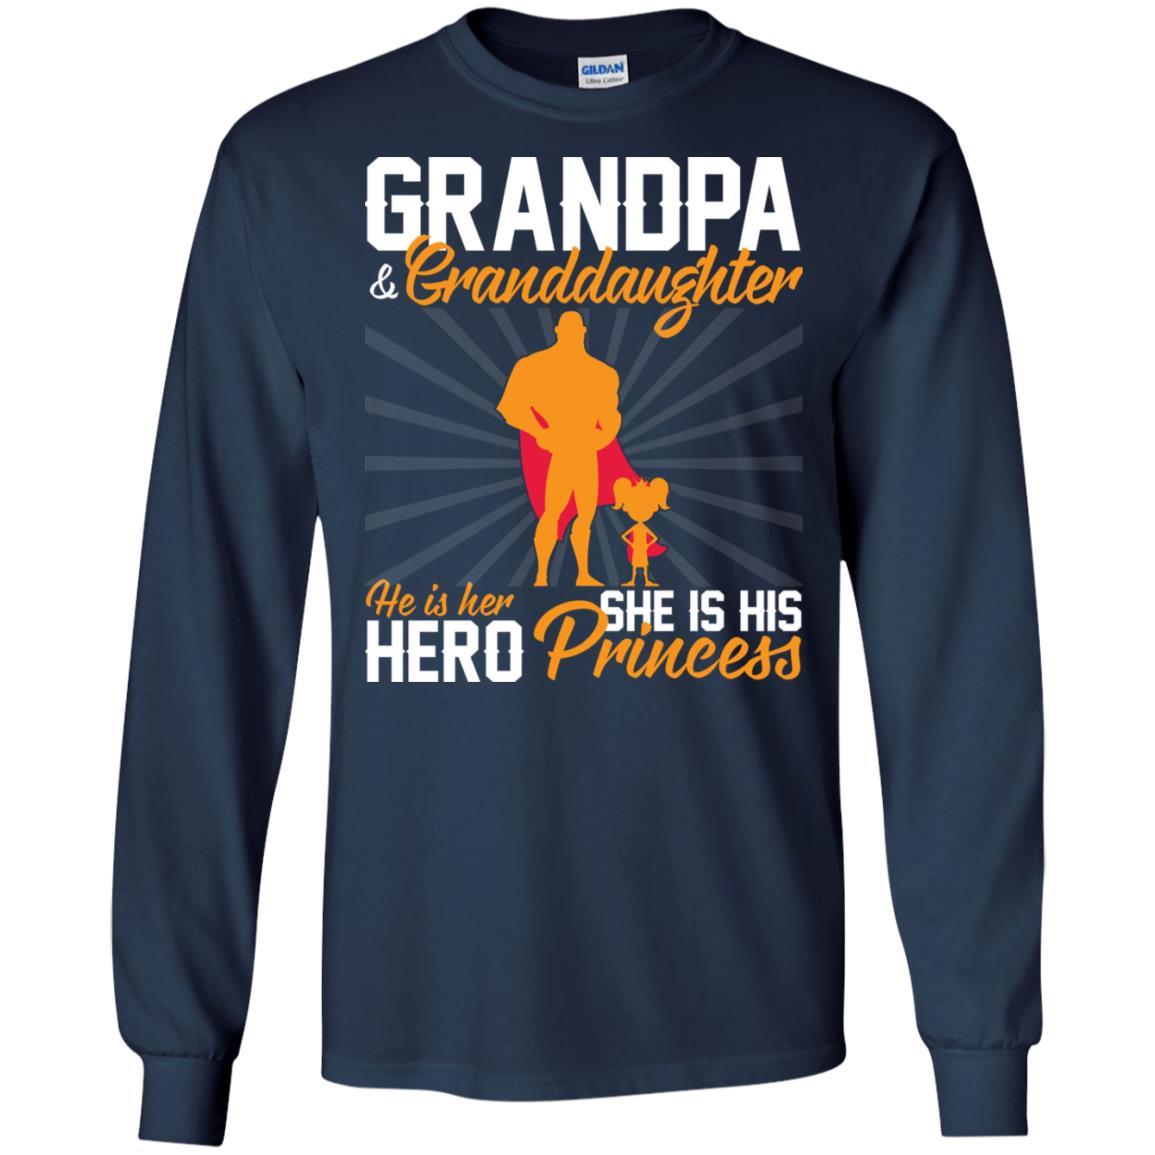 Military T-Shirt "Grandpa & granddaughter he is her hero she is his princess On" Front-TShirt-General-Veterans Nation